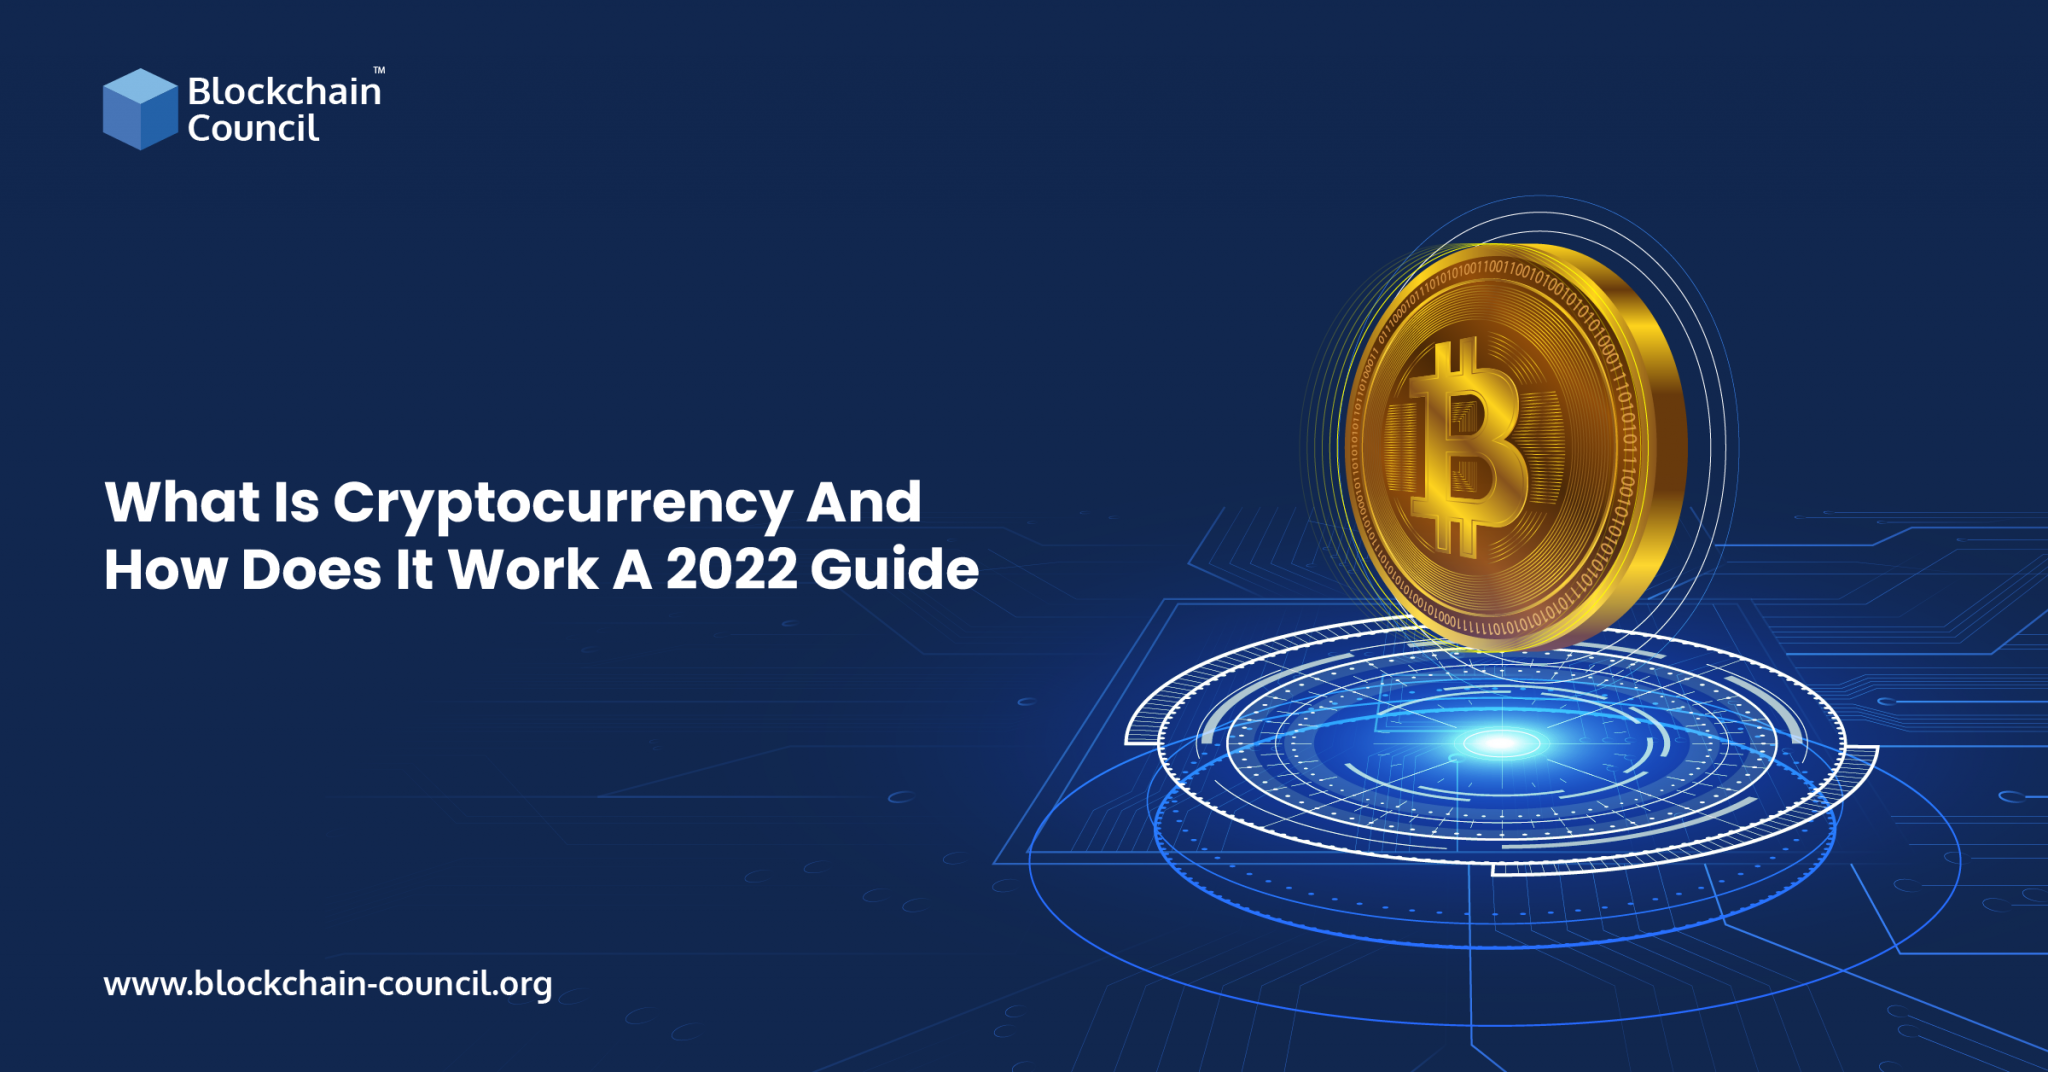 2022 cryptocurrency investment